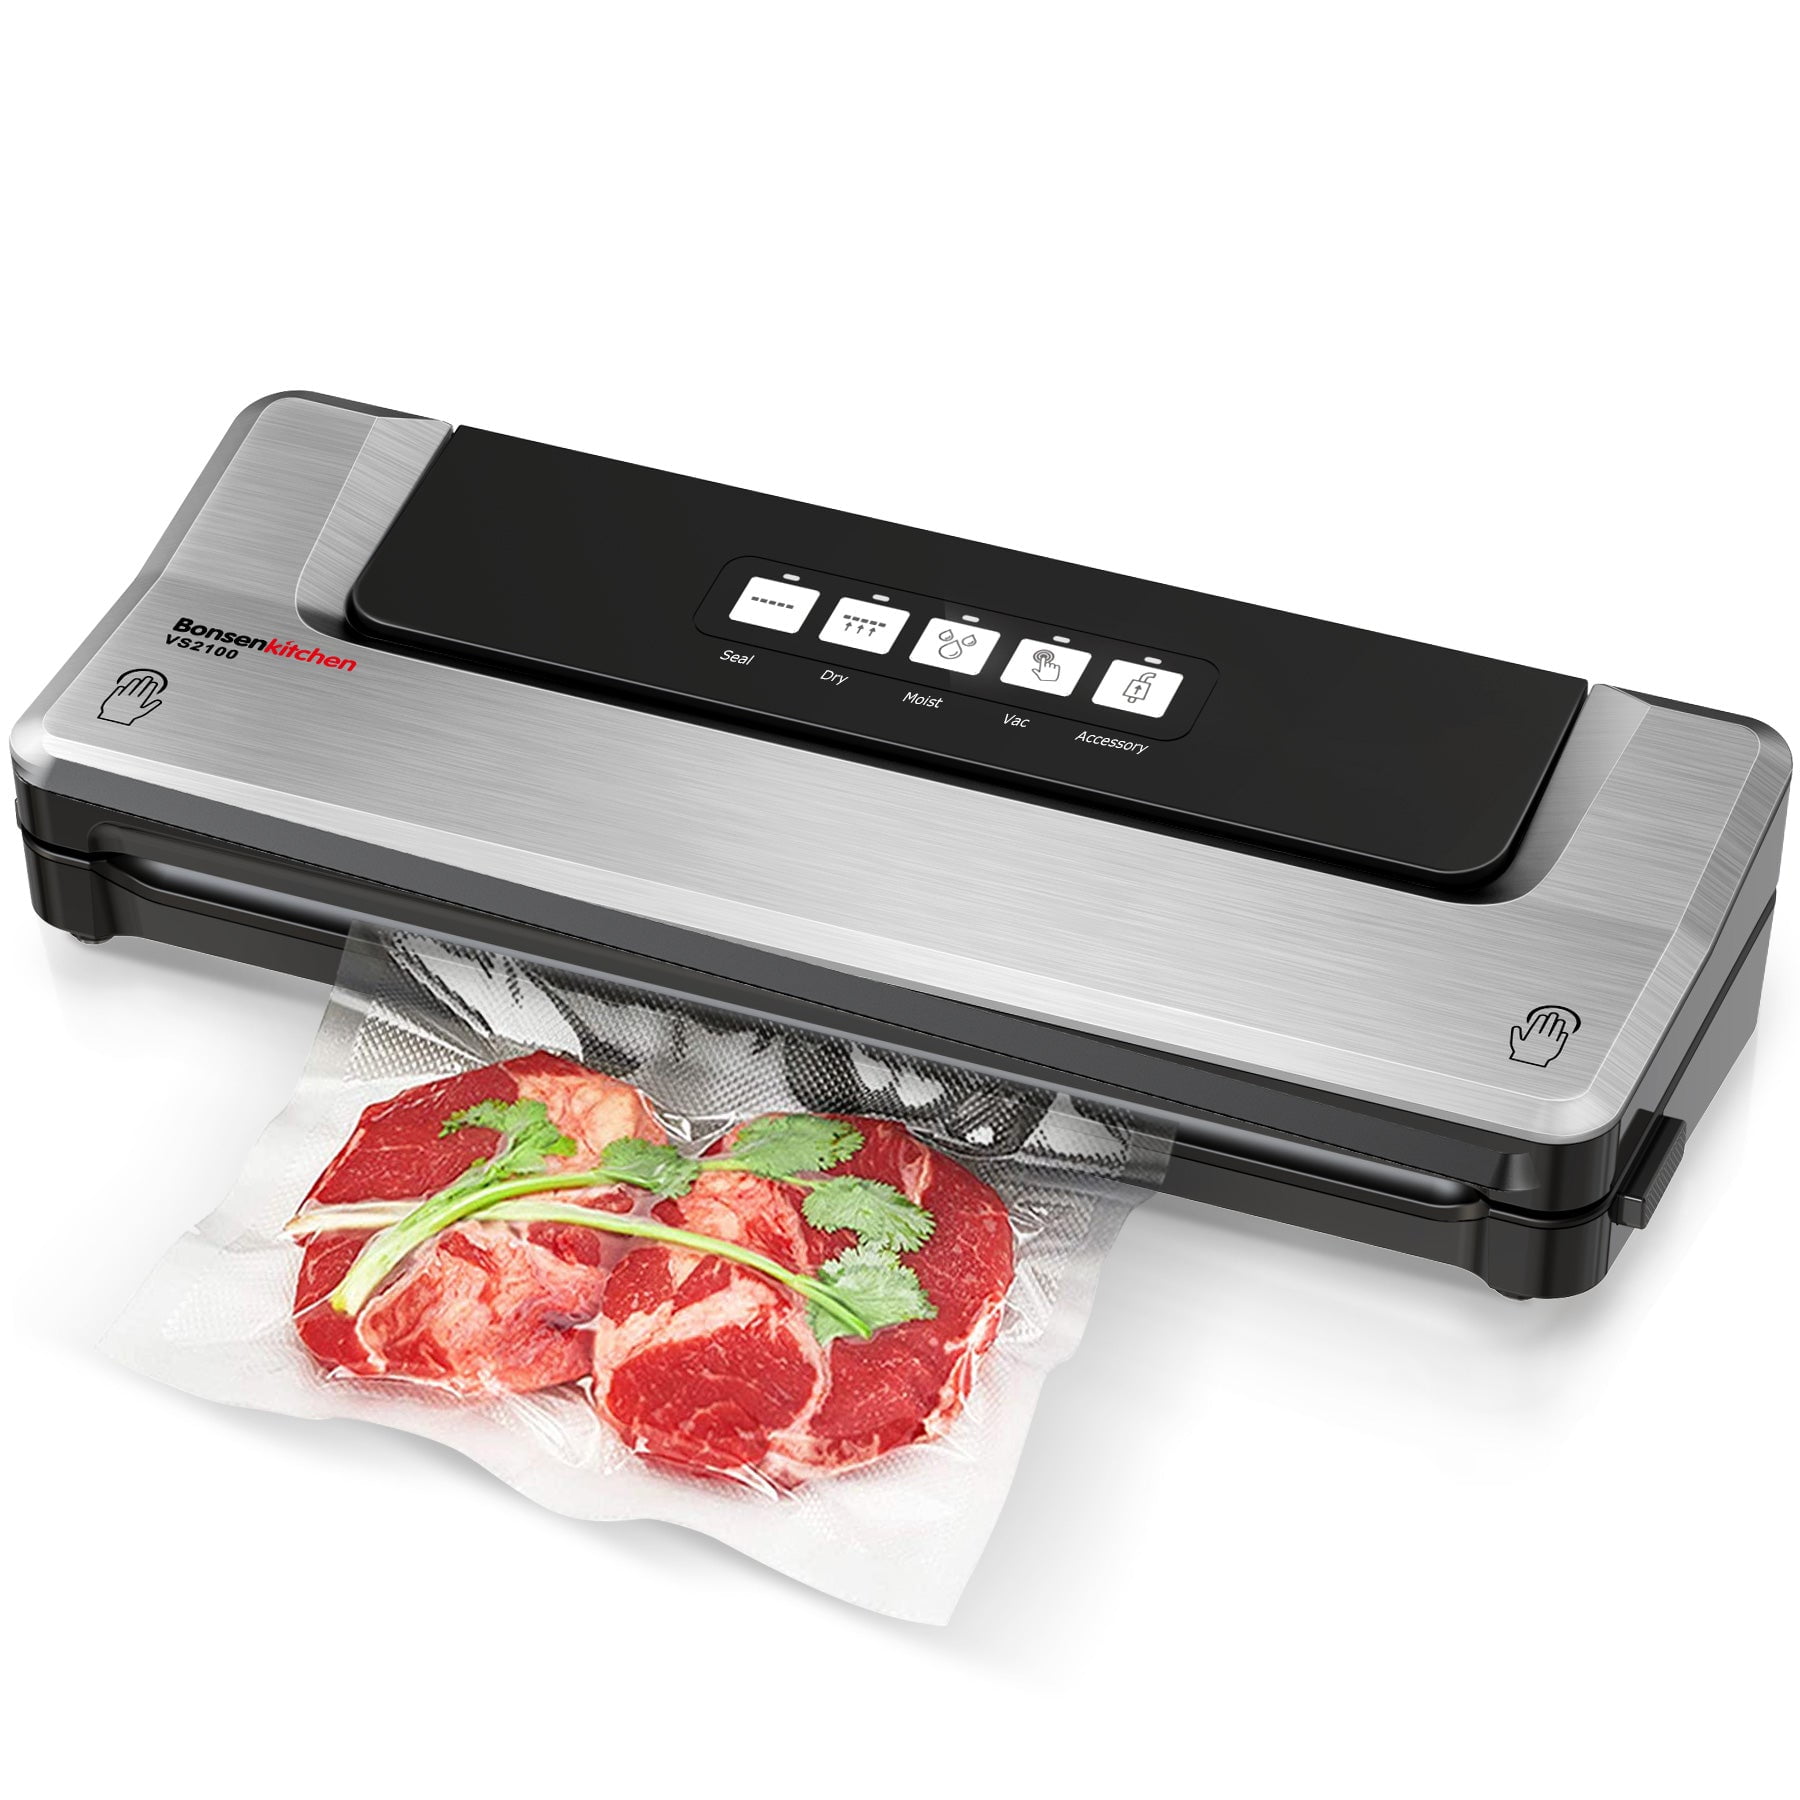 Bonsenkitchen Food Sealer Machine, Dry/Moist Vacuum Sealer Machine with  5-in-1 Easy Options for Sous Vide and Food Storage, Air Sealer Machine with  5 Vacuum Seal Bags & 1 Air Suction Hose, Silver